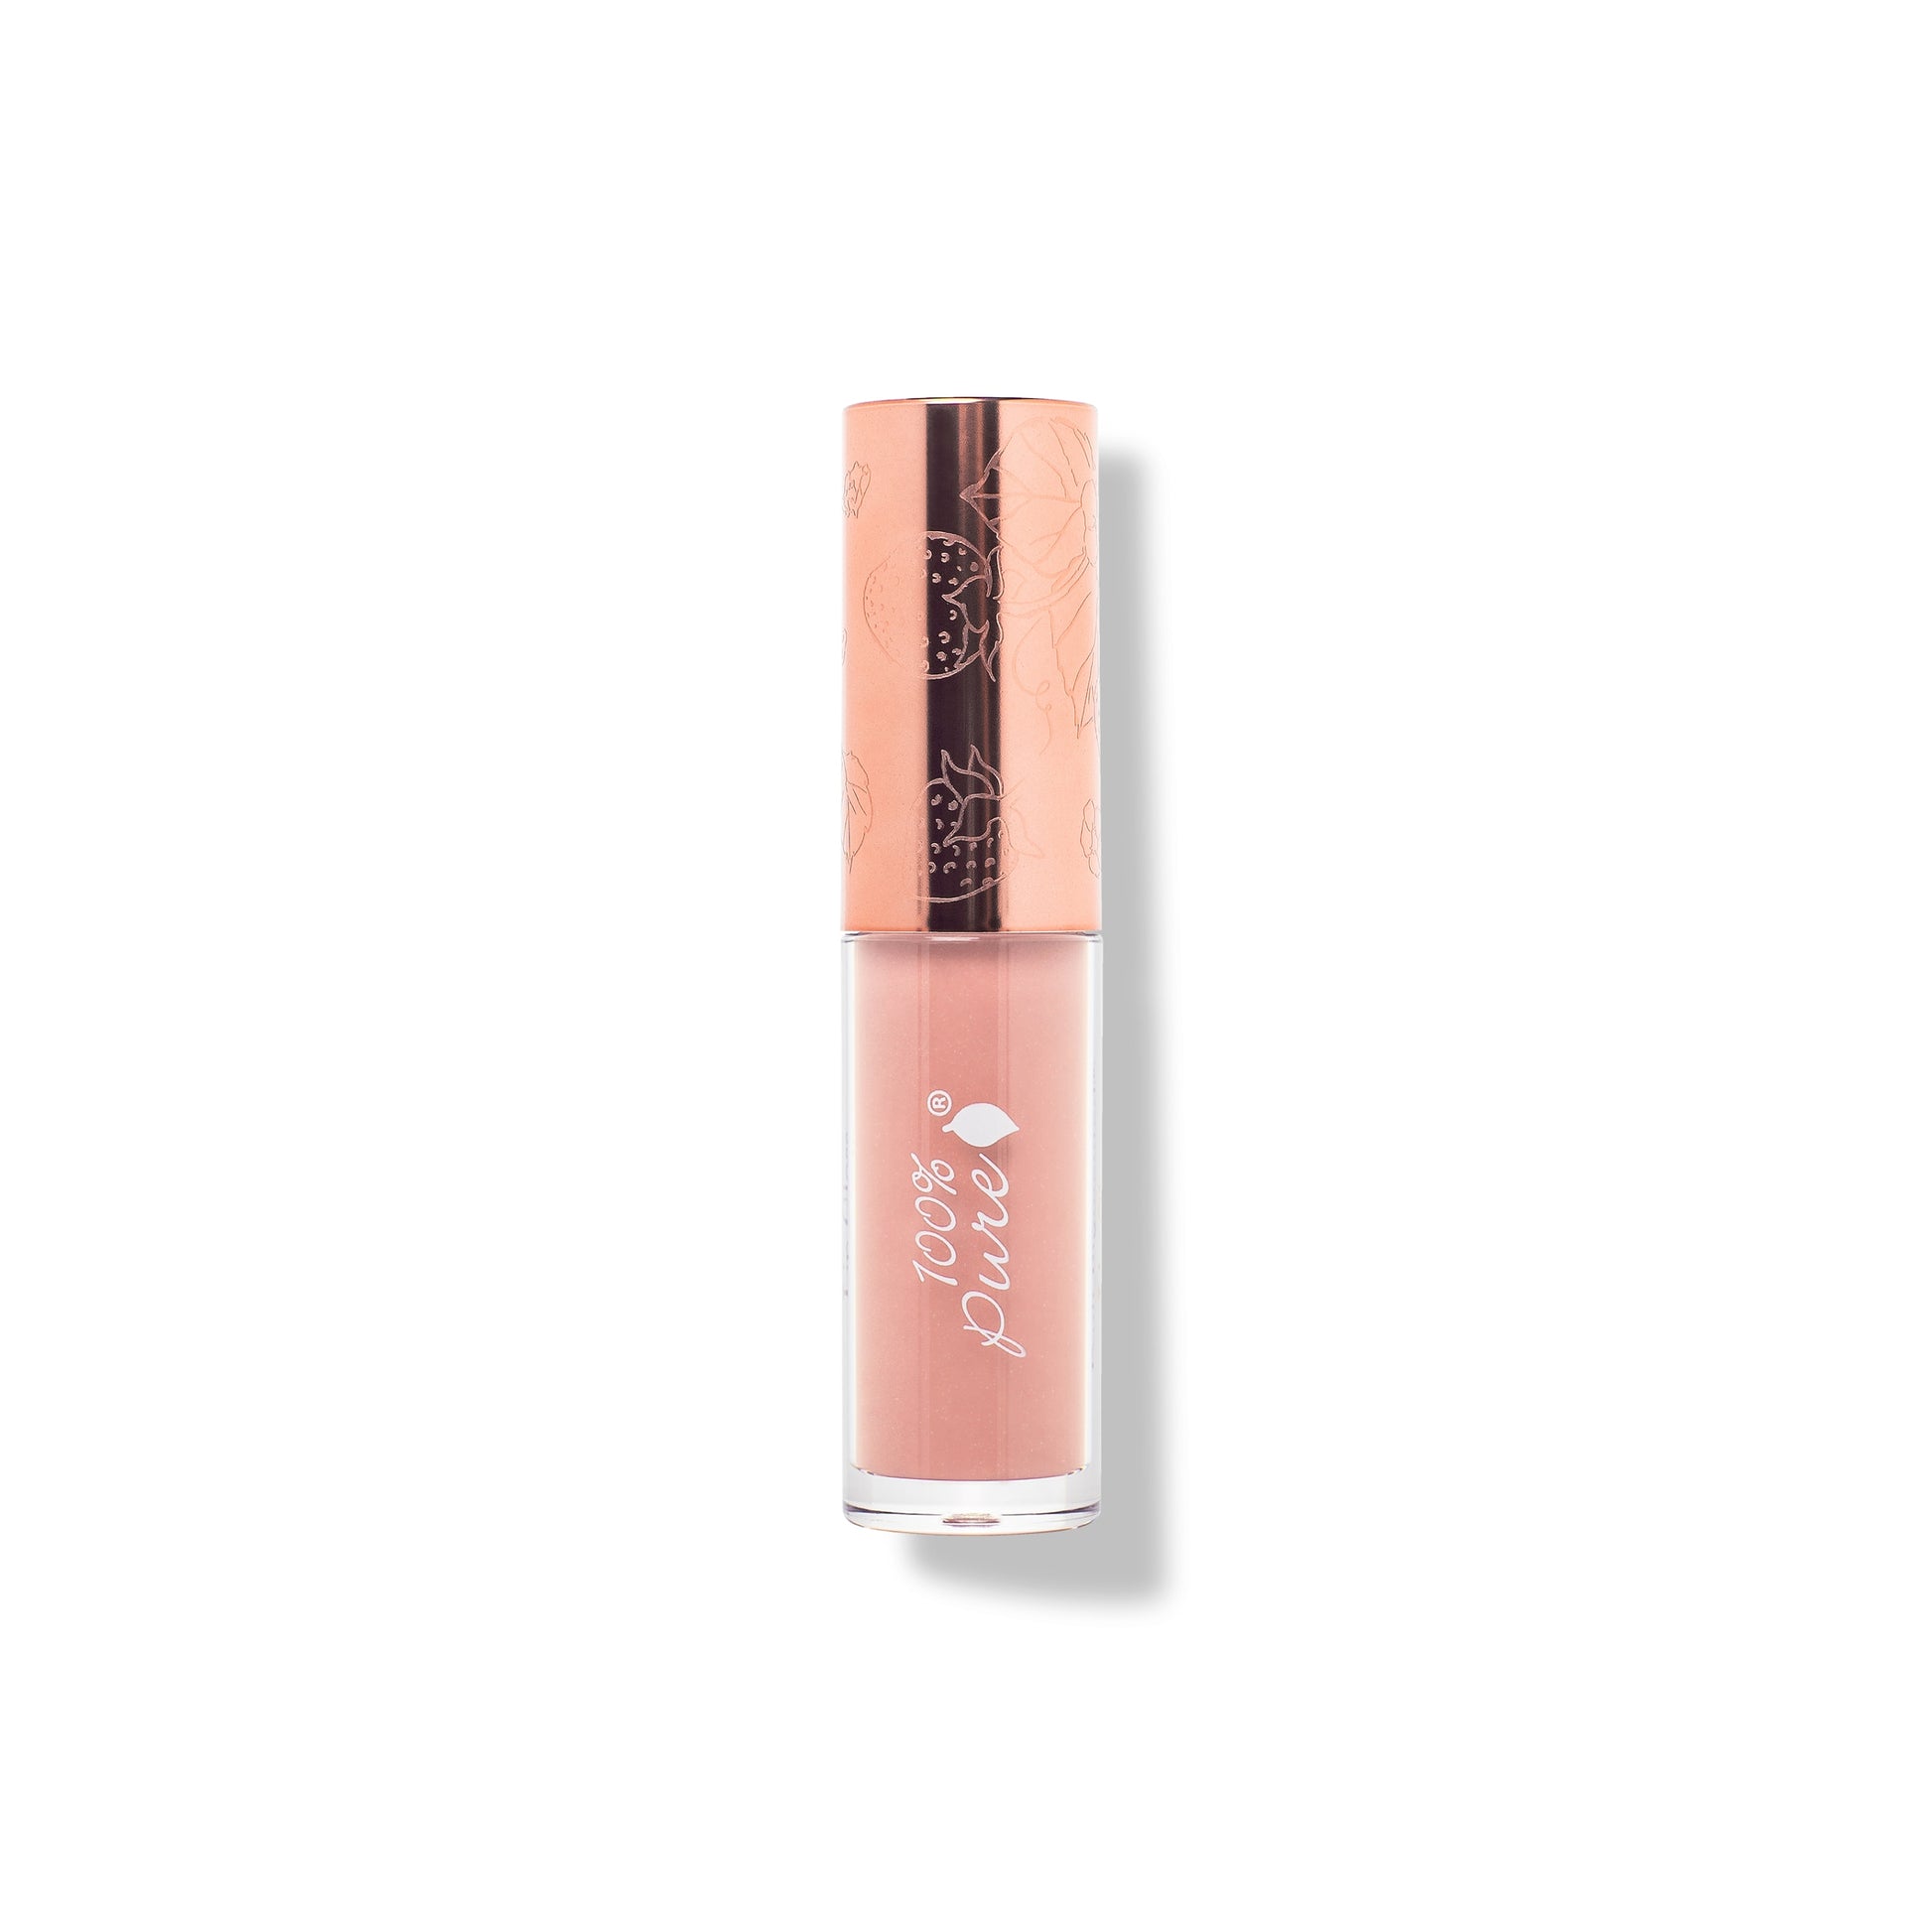 100% PURE Fruit Pigmented Lip Gloss naked